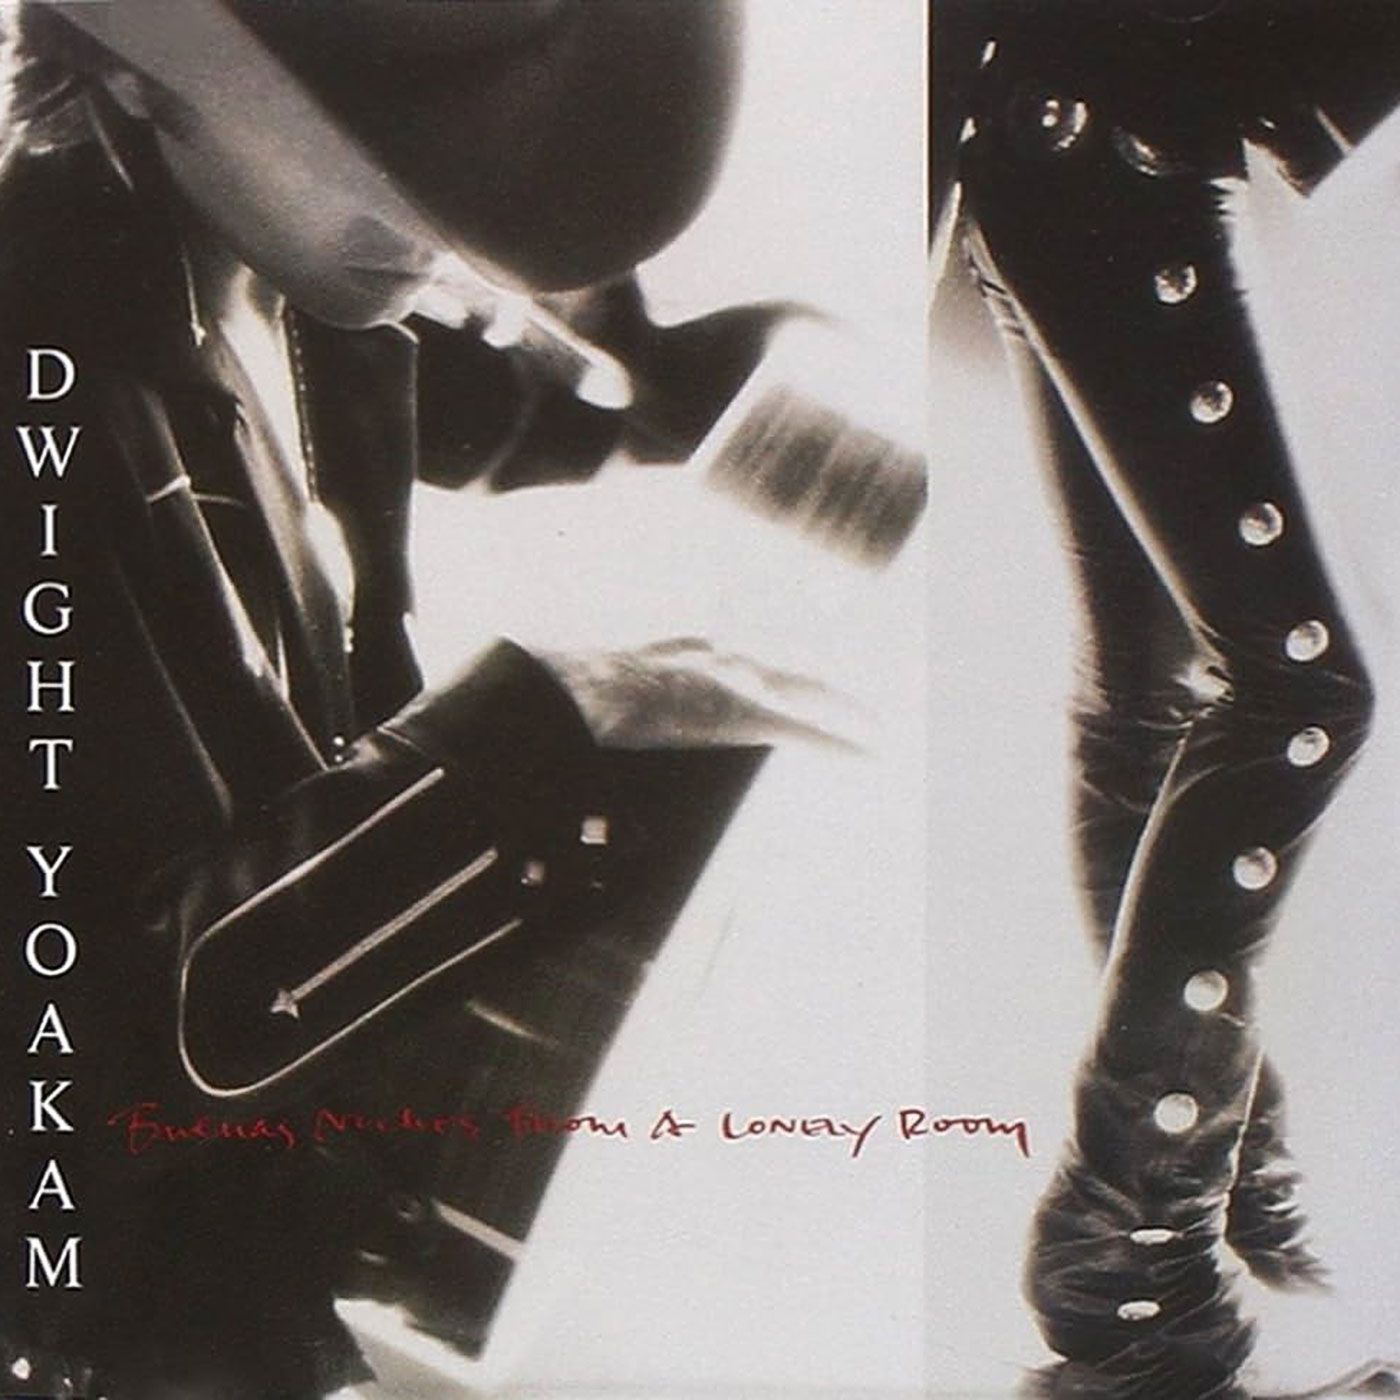 633 Dwight Yoakam – Buenas Noches From a Lonely Room